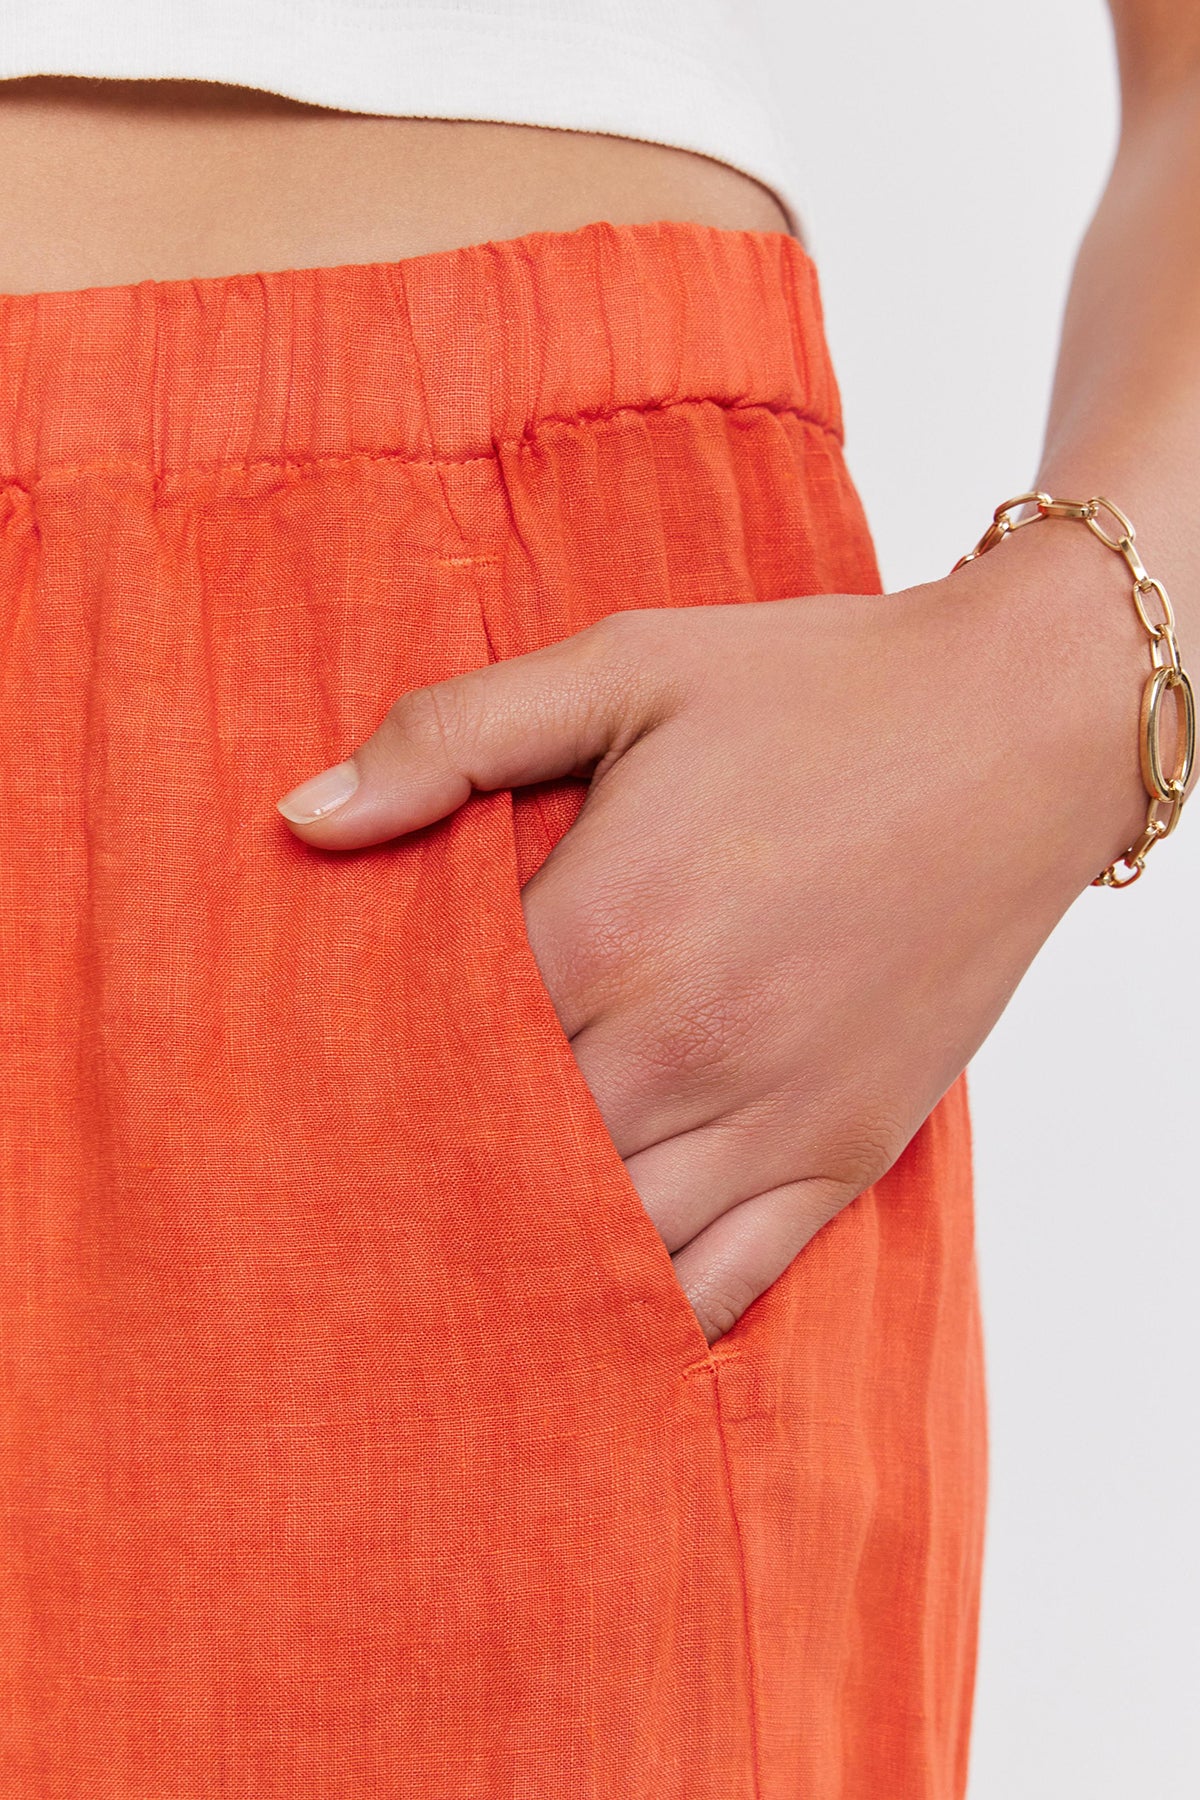 A person wearing relaxed leg, orange LOLA LINEN PANT by Velvet by Graham & Spencer with an elastic waistband has their hand in their pocket. They are also sporting a gold chain bracelet on their wrist.-36910043988161